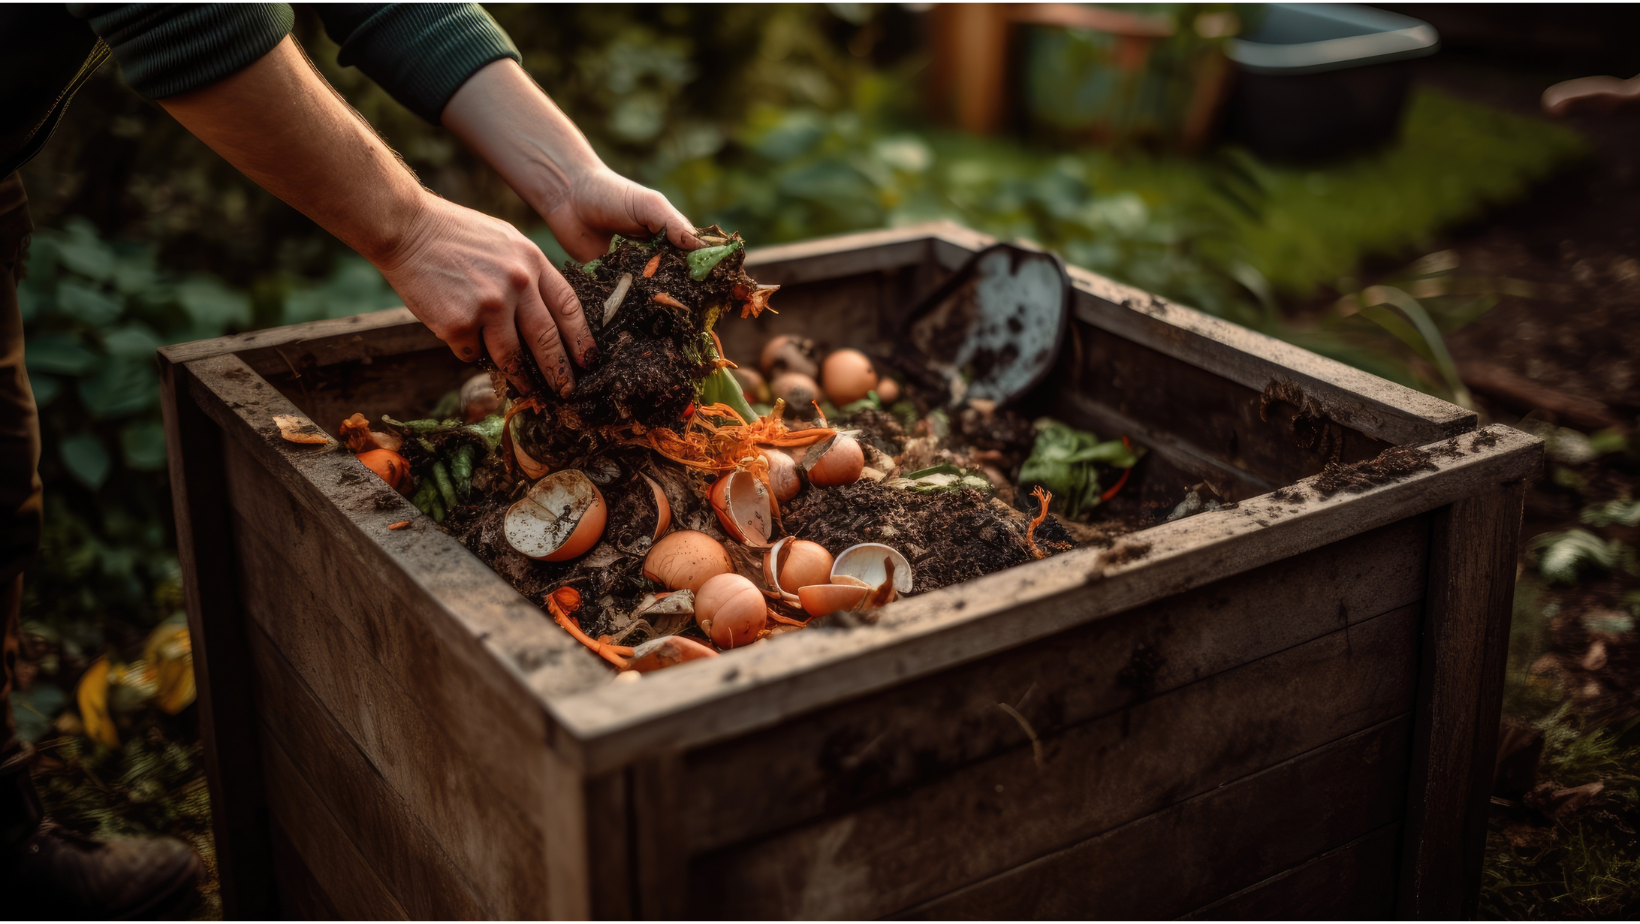 Sustainable Harvest: Eco-Friendly Composting and Responsible Collection